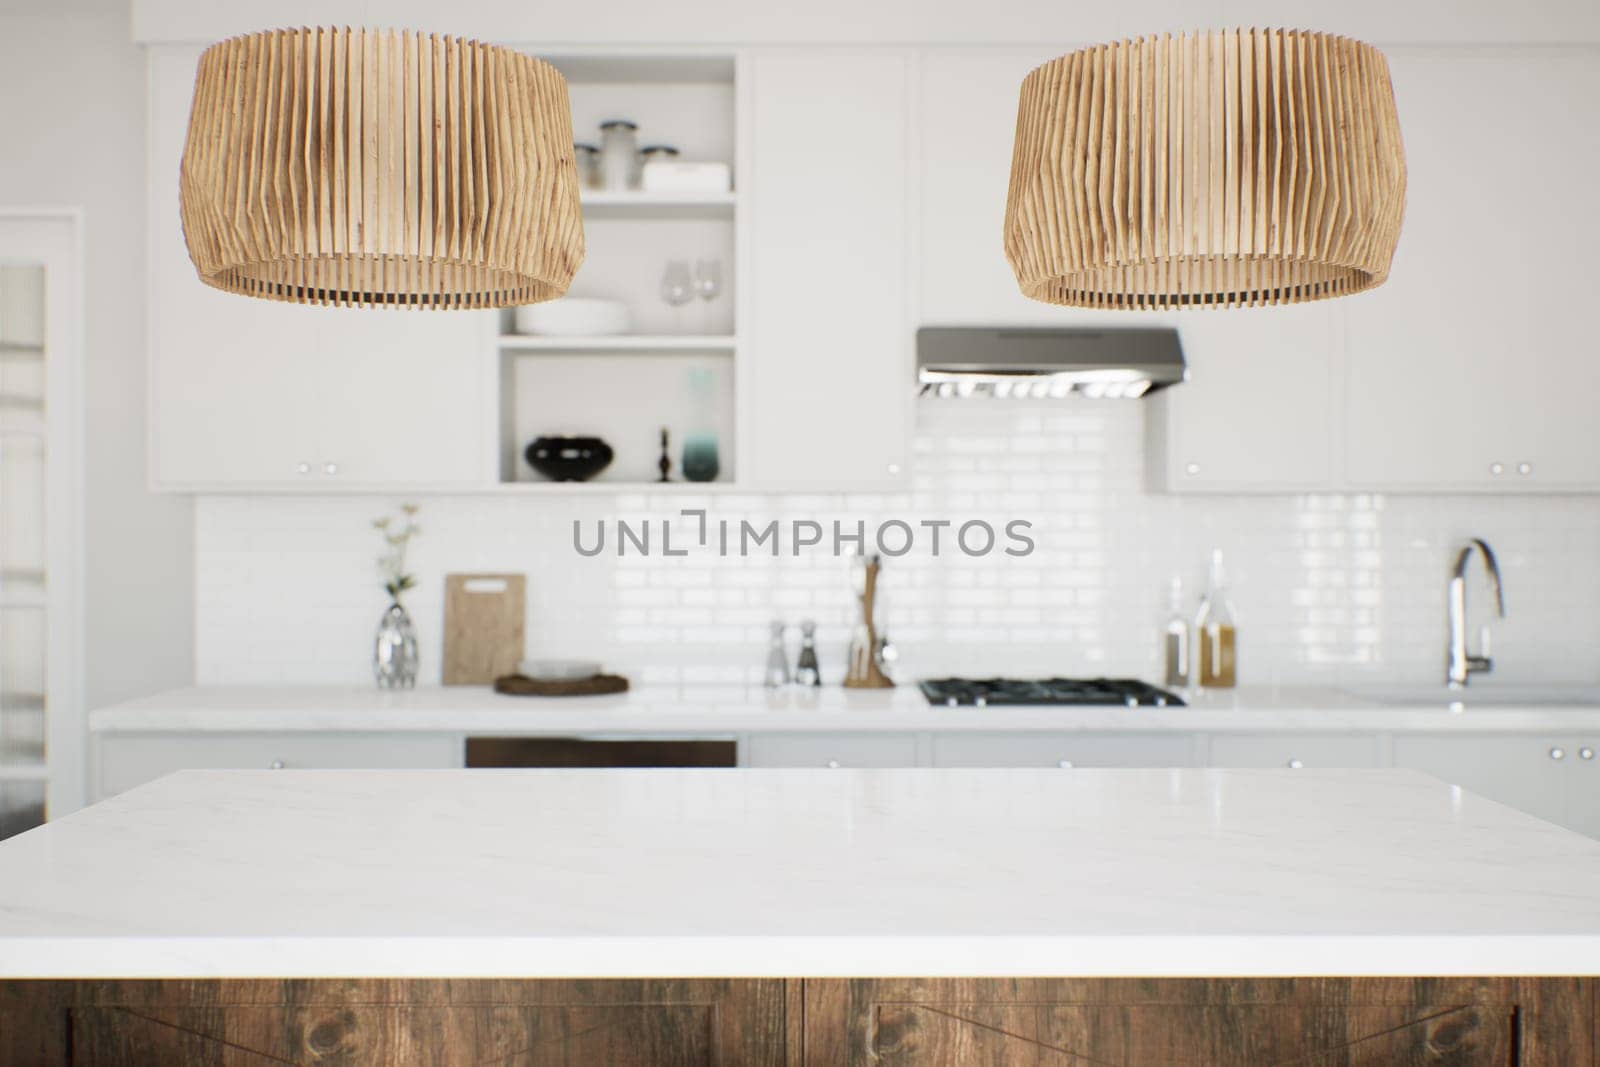 Focus on the marble countertop against the backdrop of kitchen appliances and utensils. Stylish traditional kitchen with wooden fixtures. 3D rendering